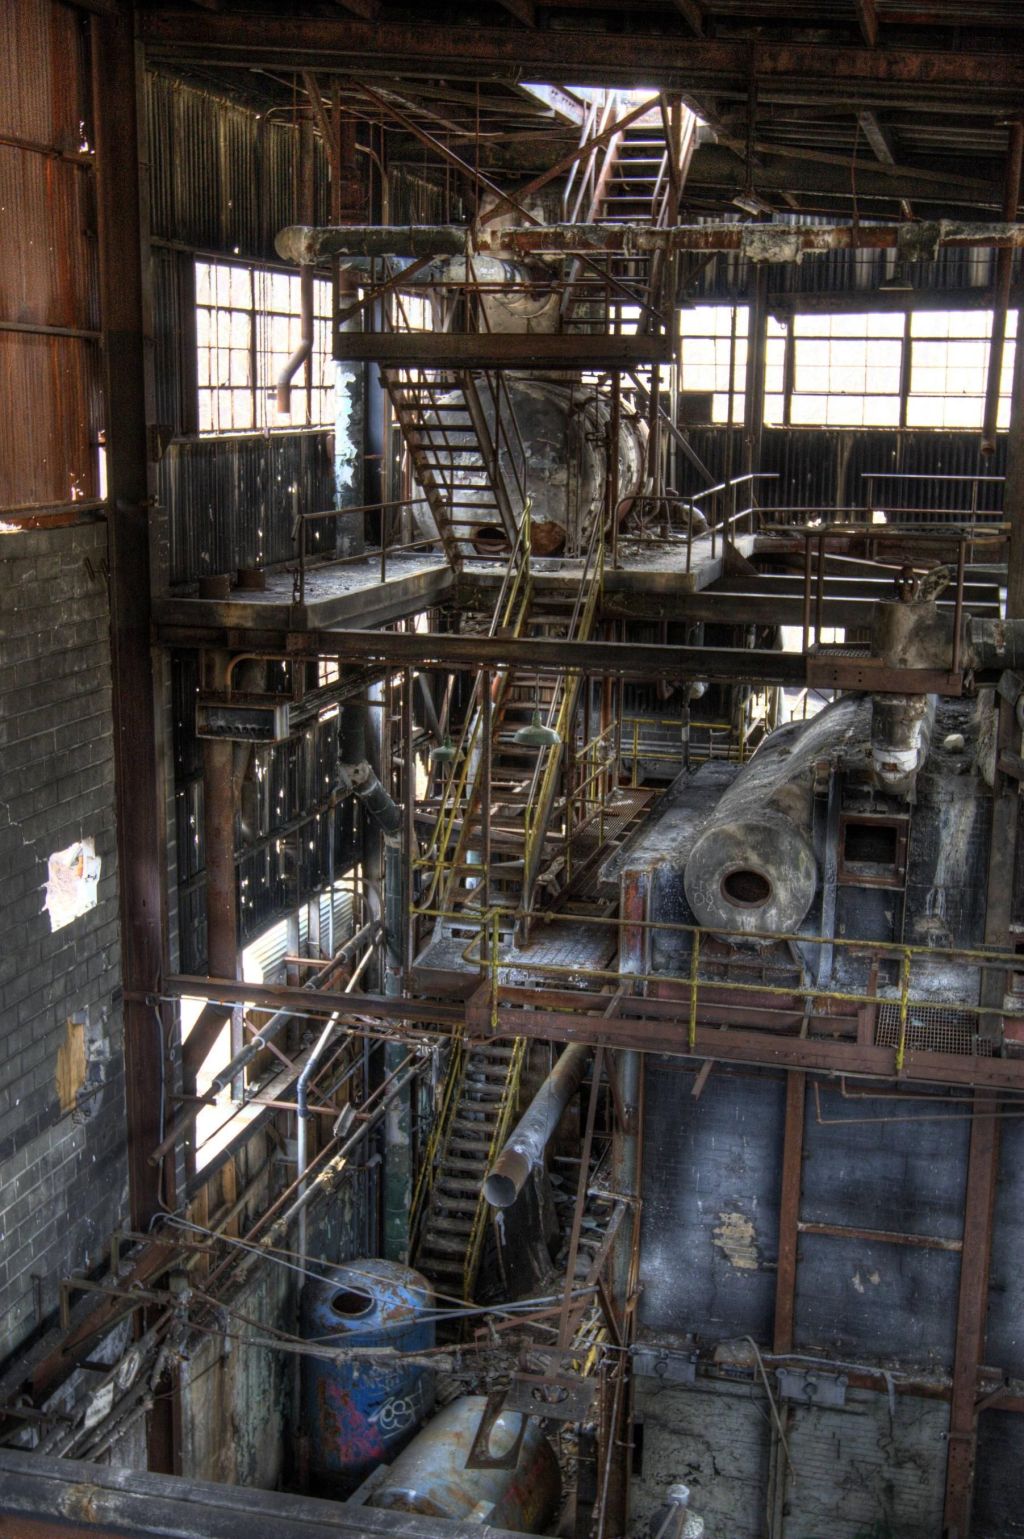 Uncovering the Forgotten: A Guide to Industrial Ruin Exploration